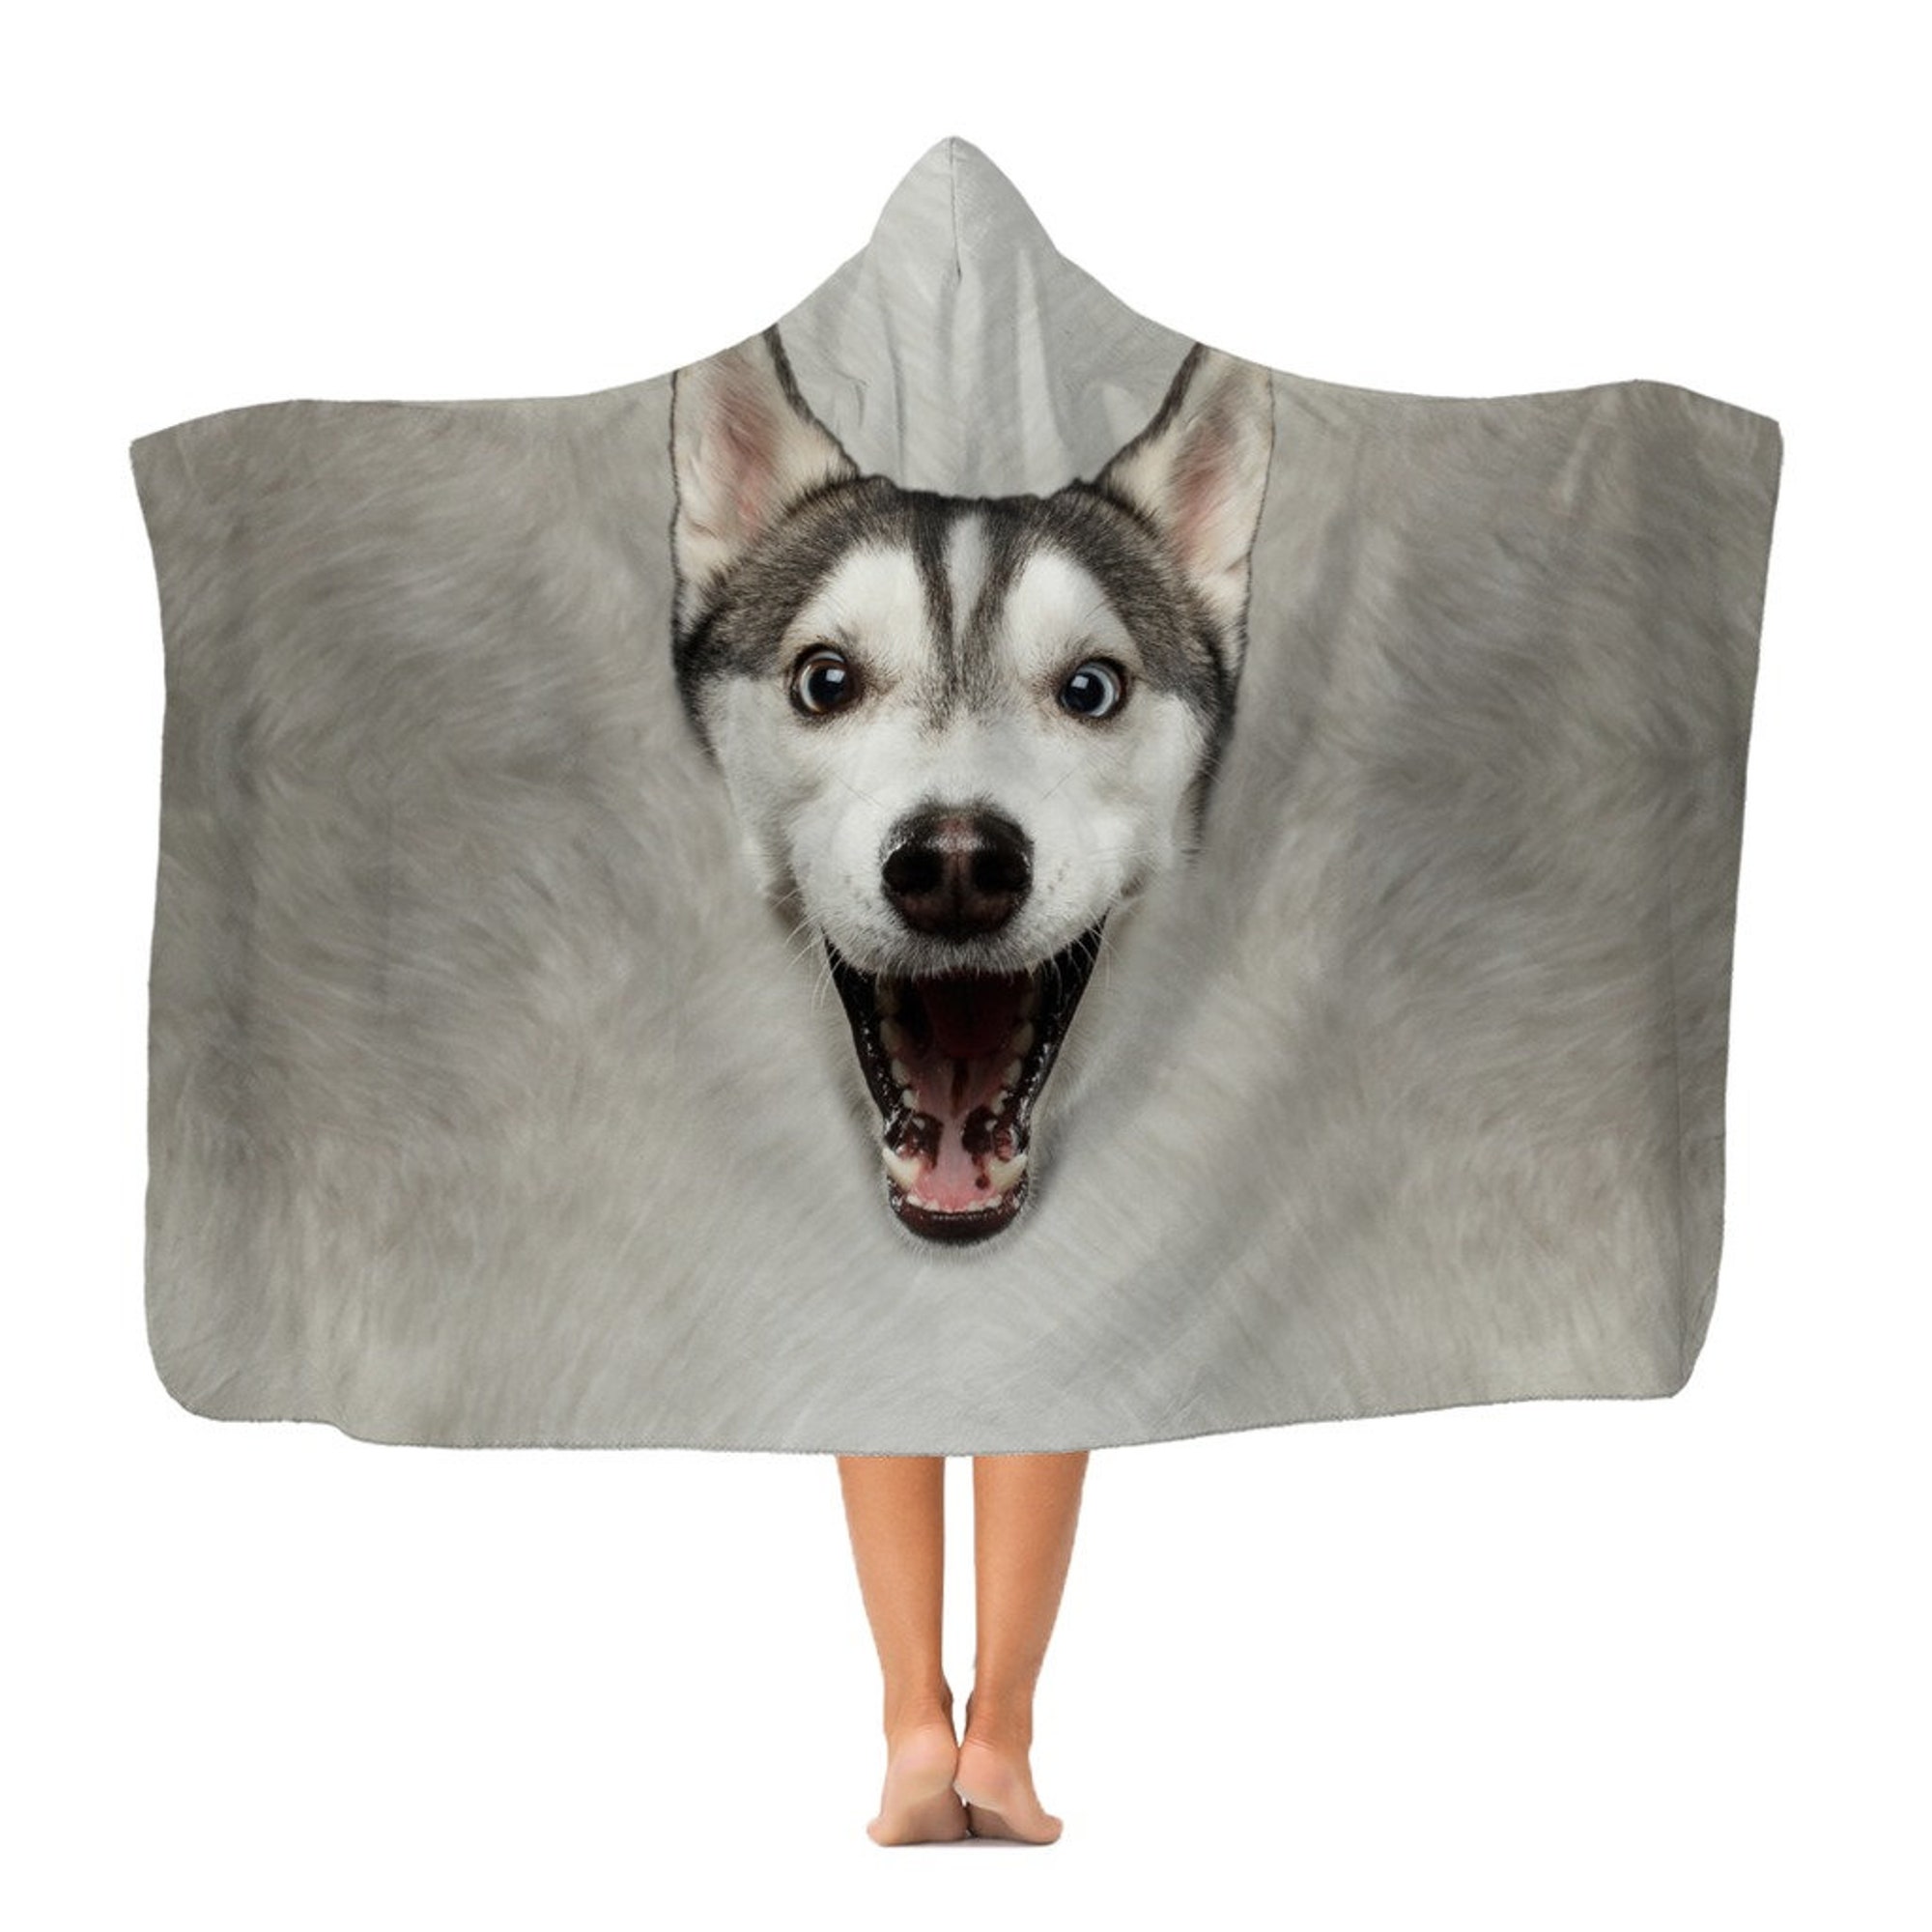 Discover Husky Dog Funny Classic Adult and Kids Hooded Blanket